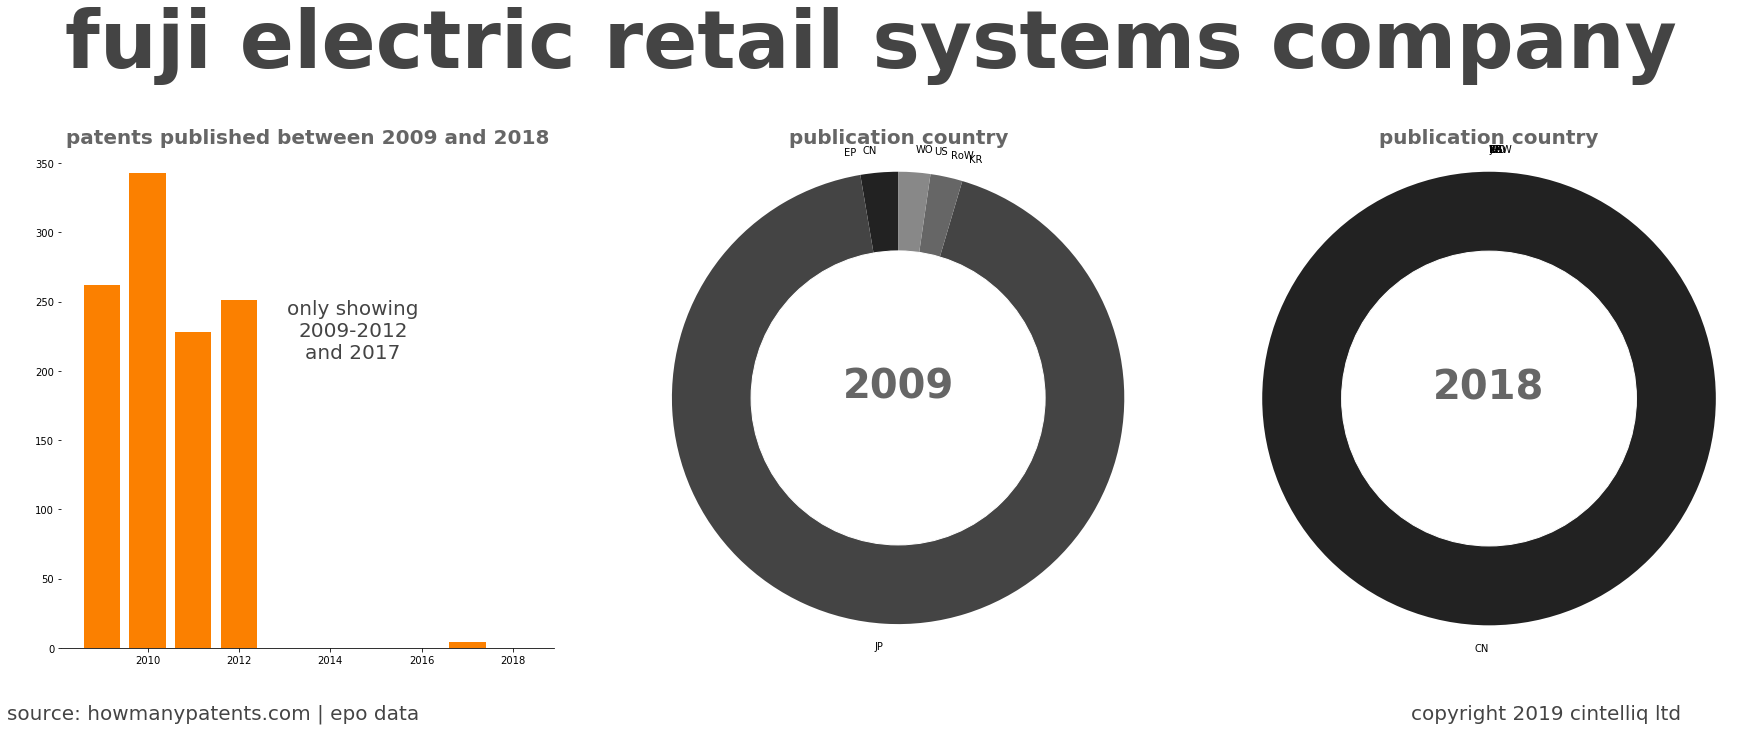 summary of patents for Fuji Electric Retail Systems Company